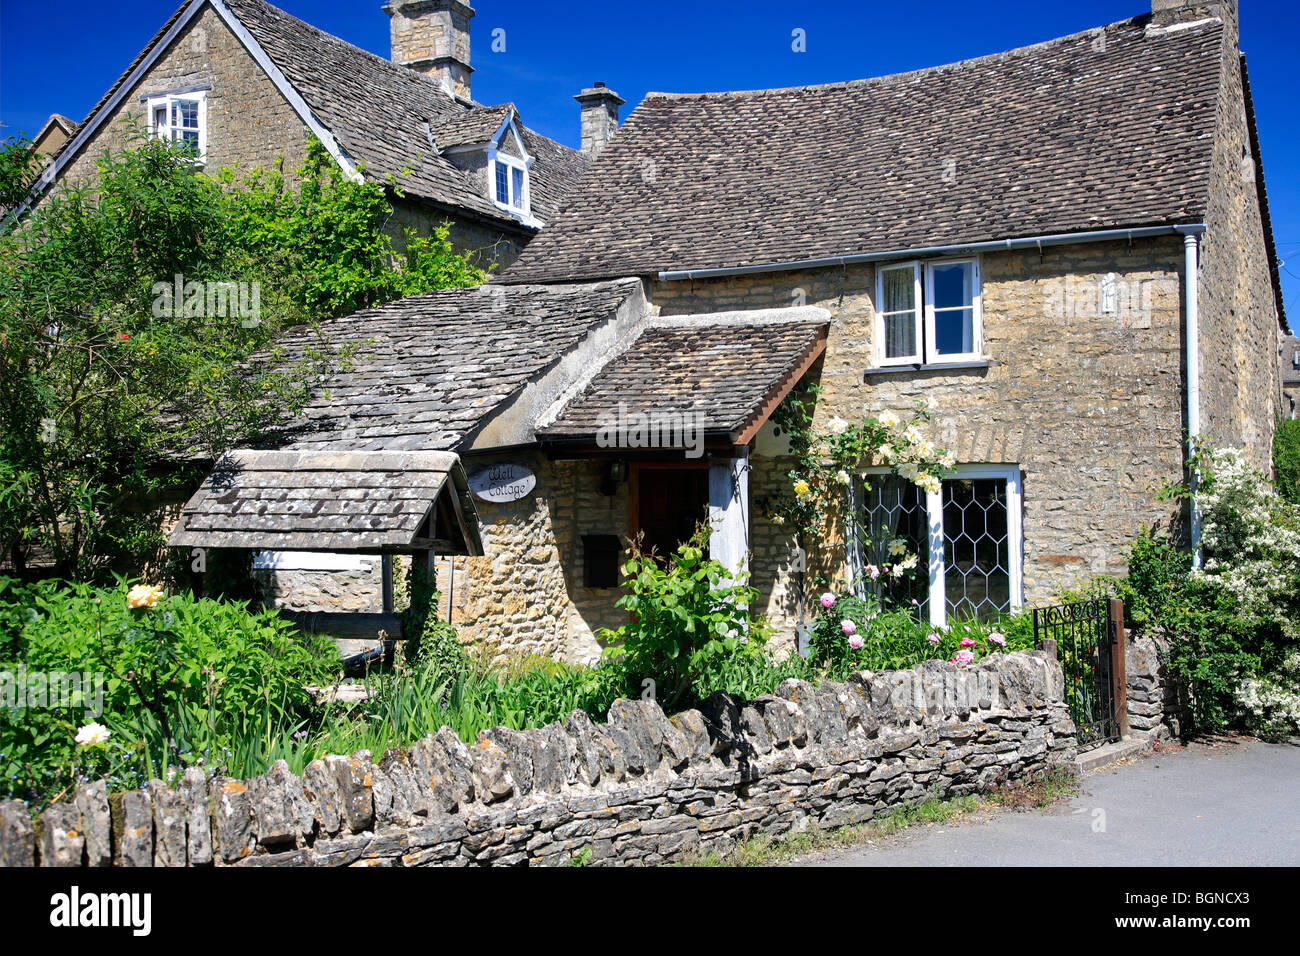 Stone Built Cottages Bourton On The Water Village Gloucestershire